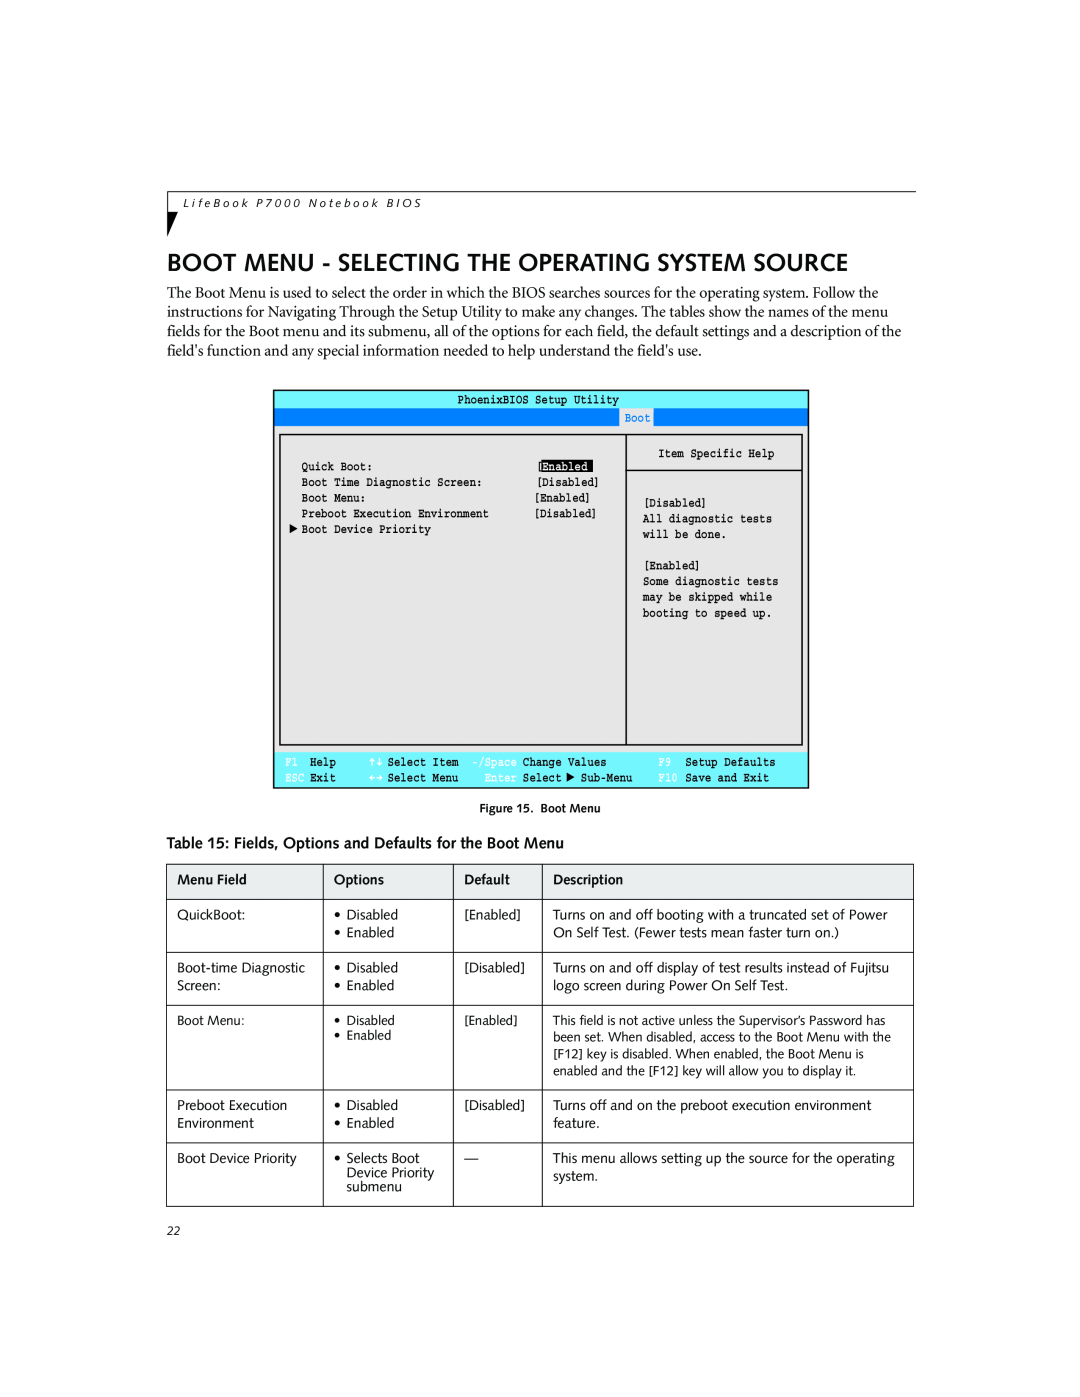 Fujitsu P7010D manual Boot Menu - Selecting The Operating System Source, Fields, Options and Defaults for the Boot Menu 